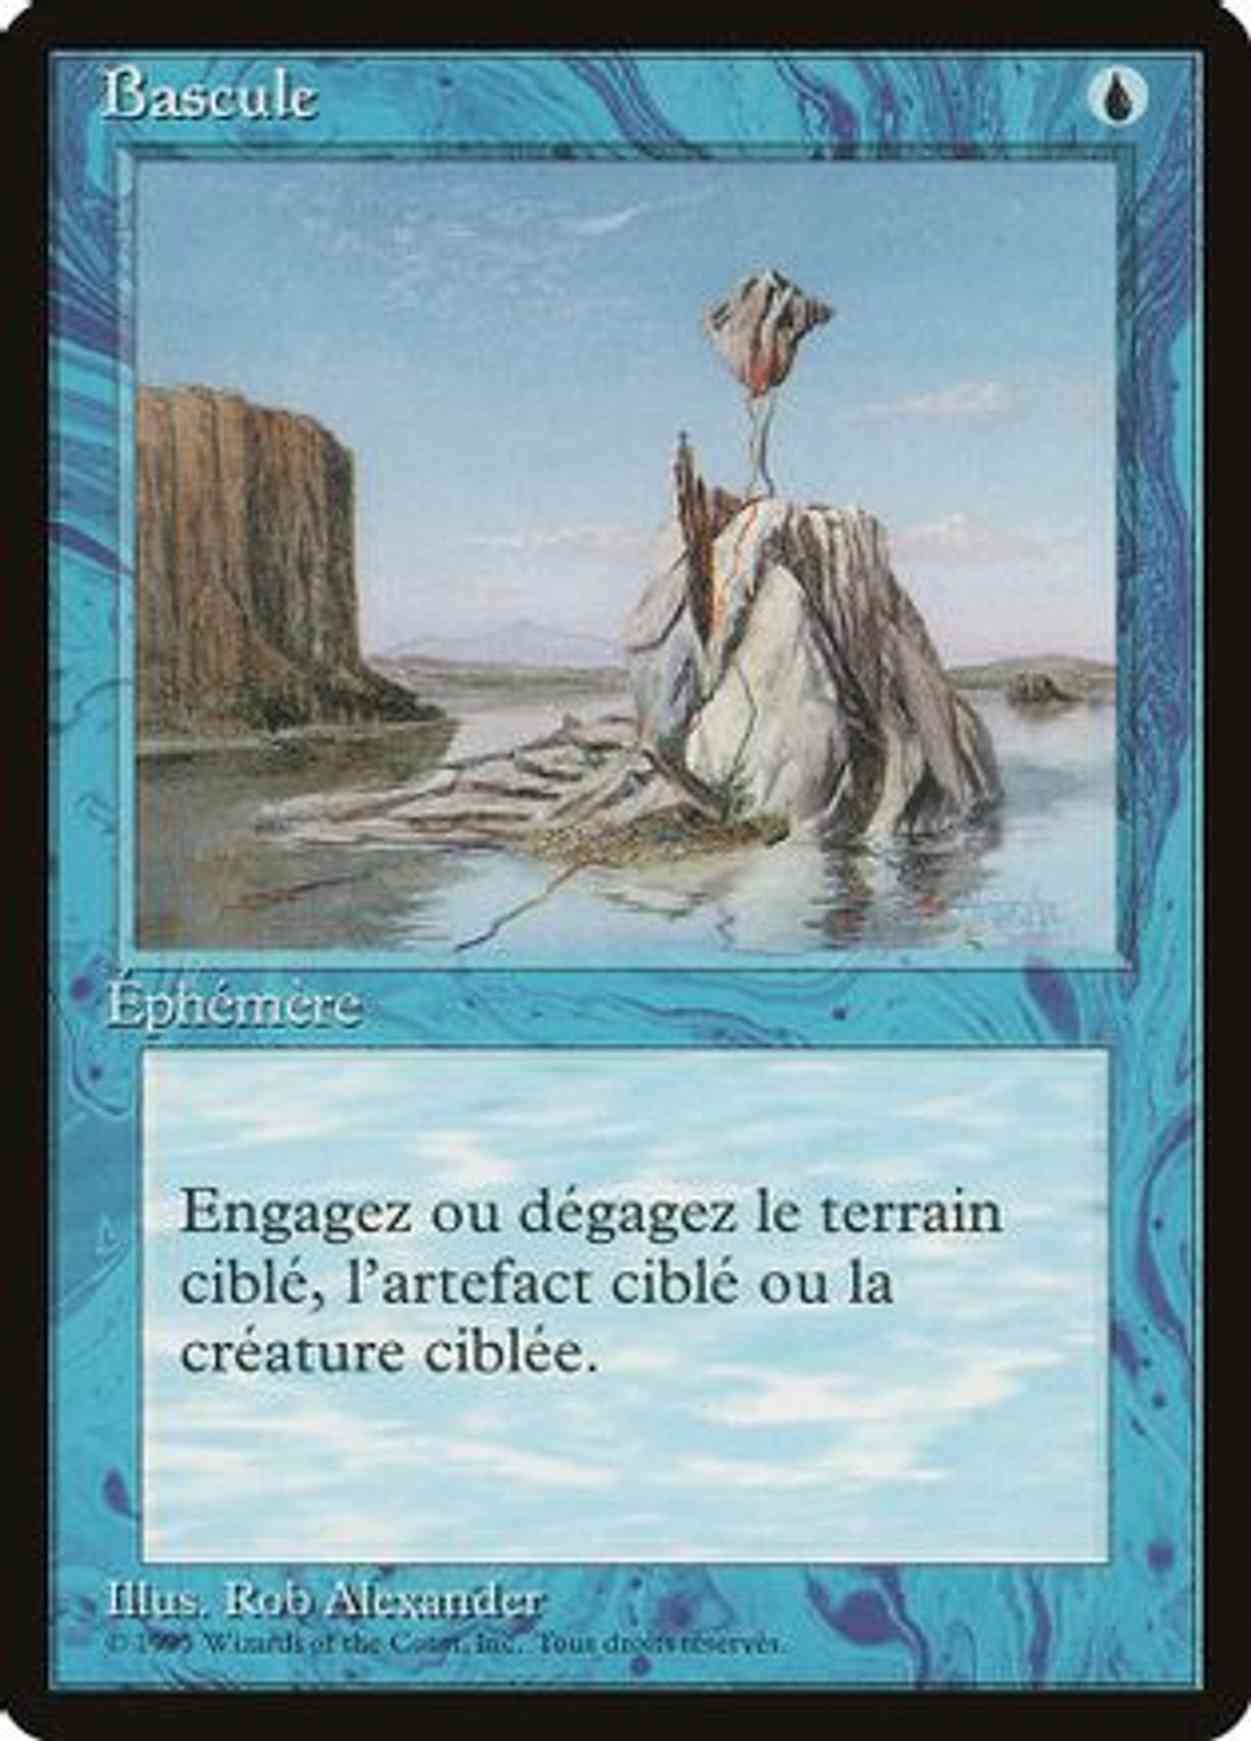 Twiddle (French) - "Bascule" magic card front